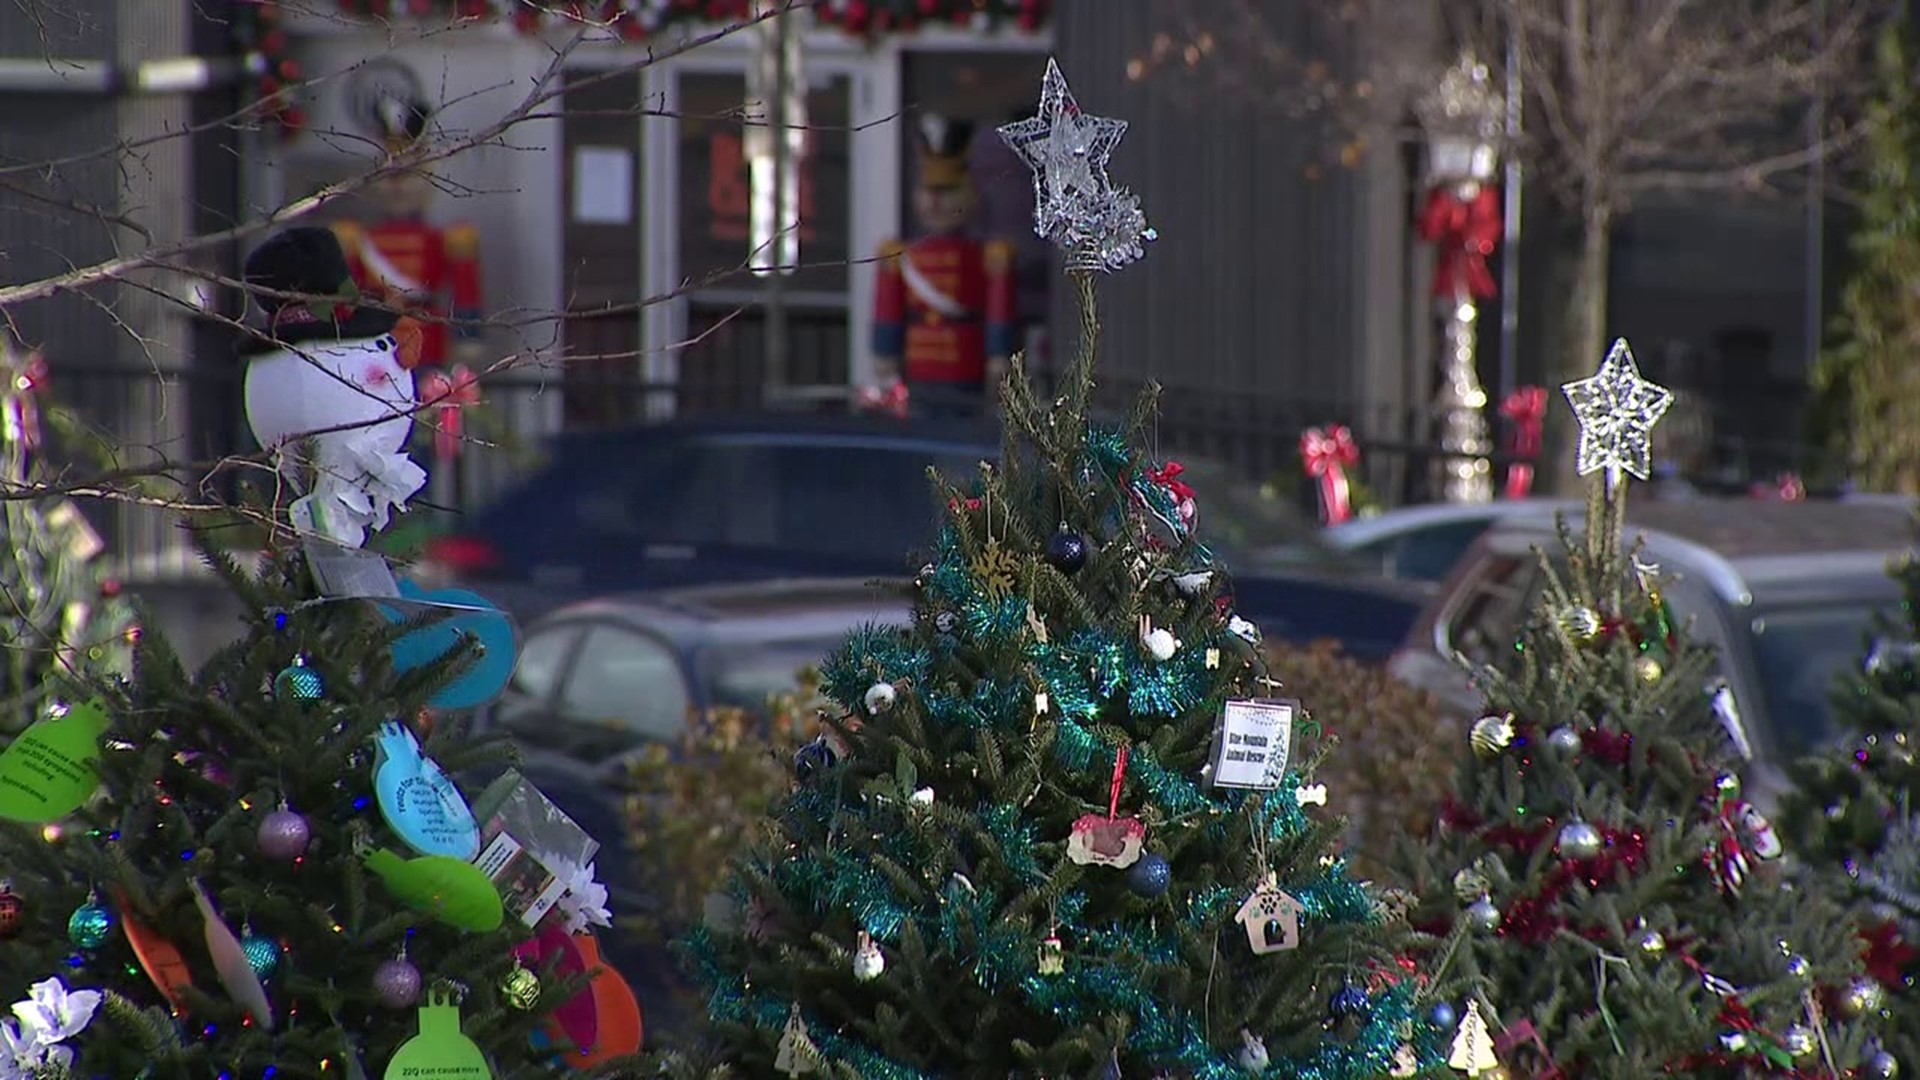 More than 170 trees are lit up in Lehighton’s park for the borough’s annual event.